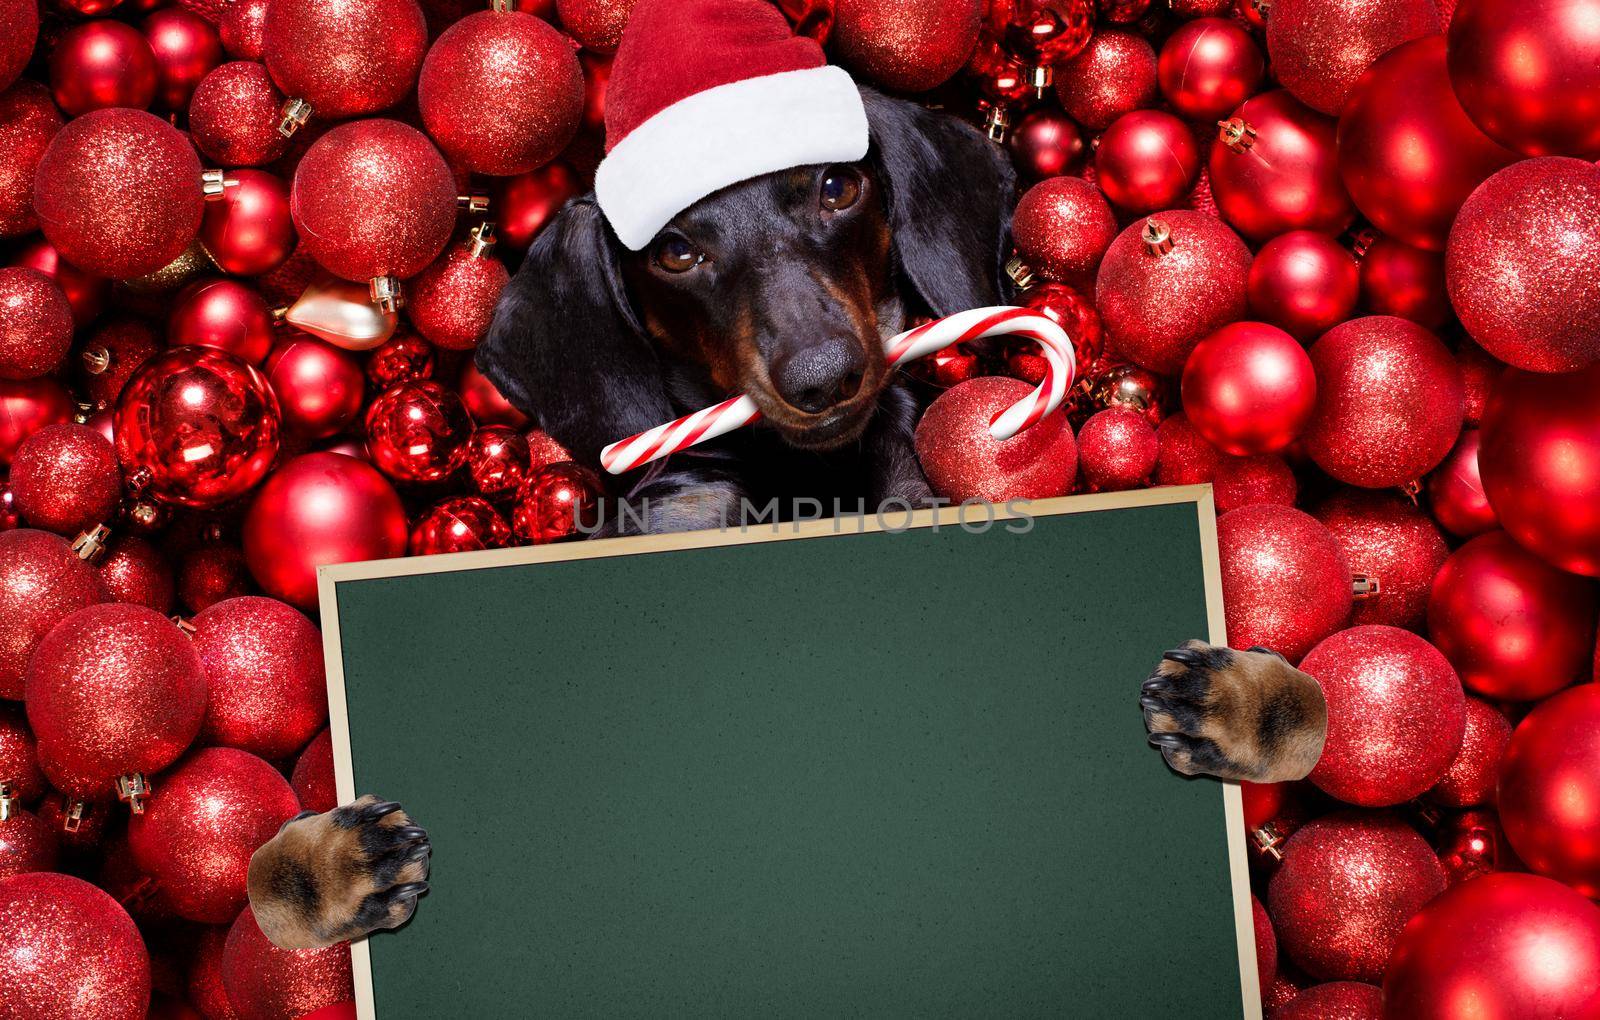 dachsund sausage dog  as santa claus  for christmas holidays resting on a xmas balls baubles as background holding a  present gift or banner blackboard poster